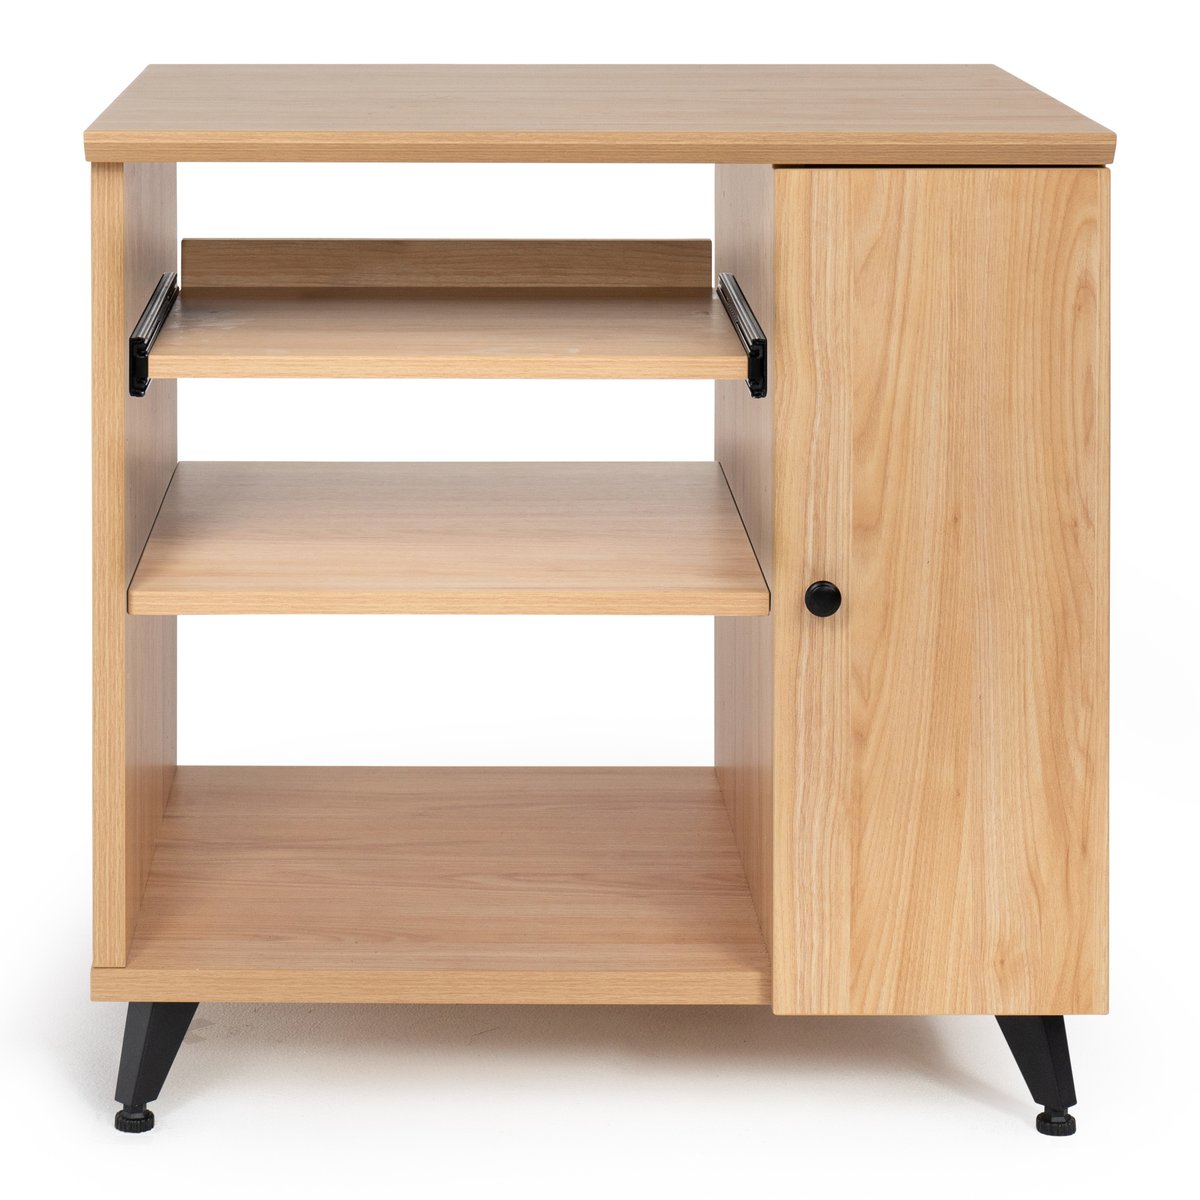 Elite Furniture Series Rolling Rack Sidecar Cabinet in Maple Finish with Configurable Rack Space & Shelving